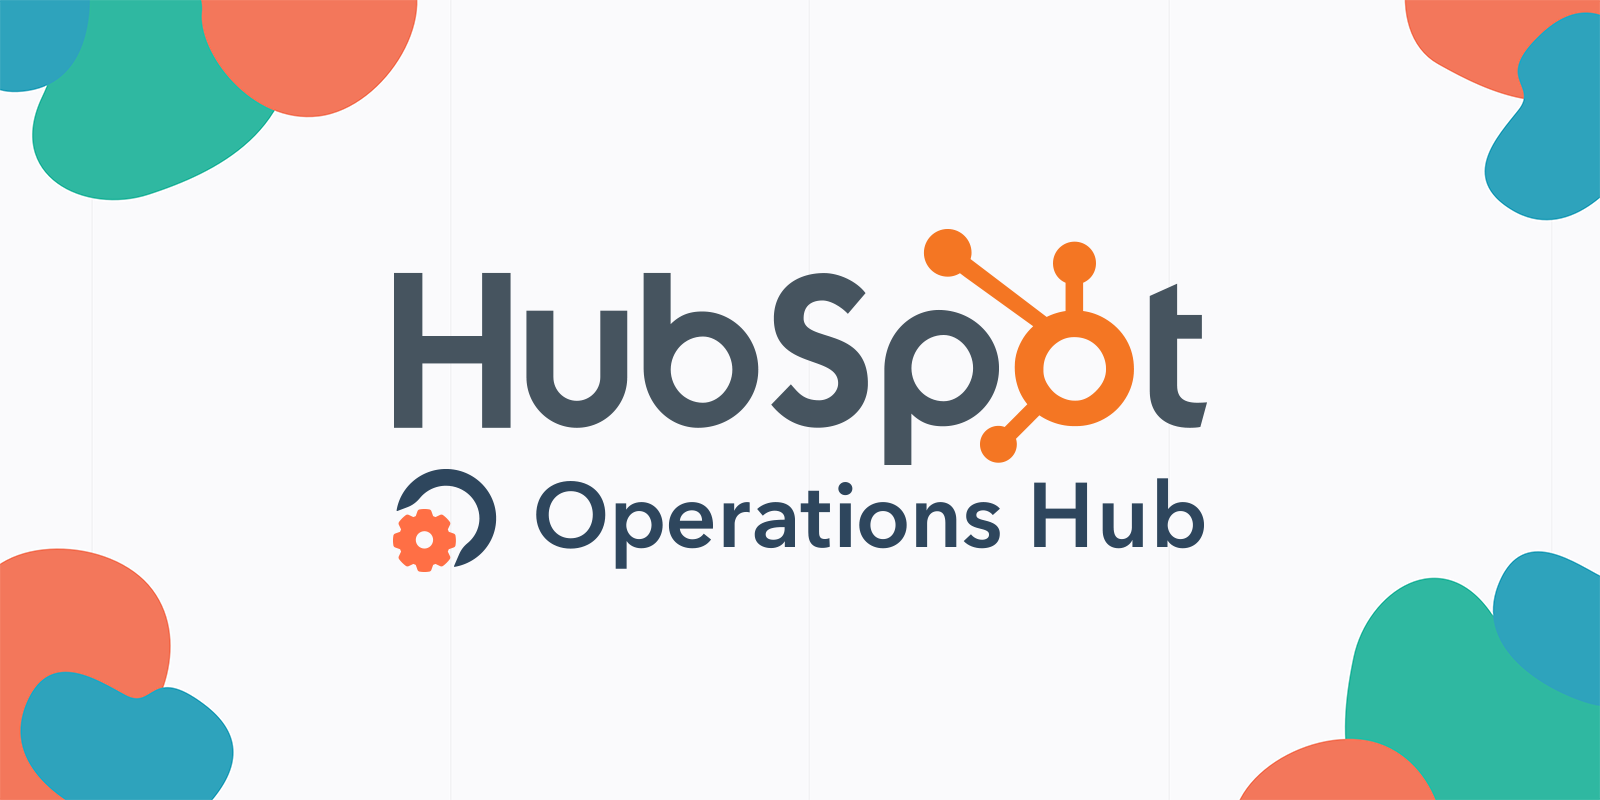 An Easy Guide to HubSpot’s Operations Hub